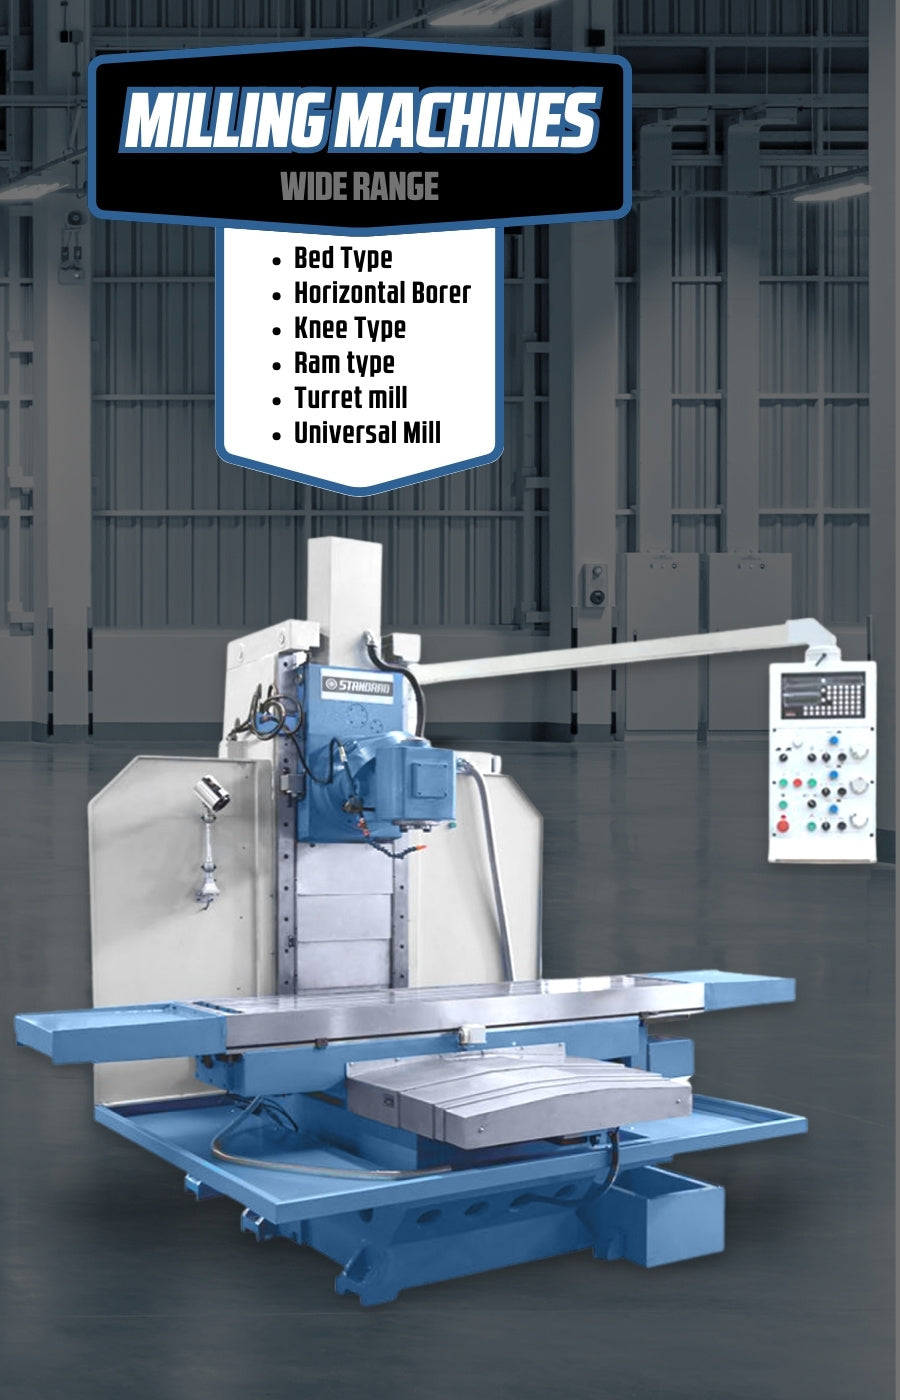 Mobile Banner for the Range of STANDARD Milling Machinery, Universal mills, bed mills and horizontal borers.